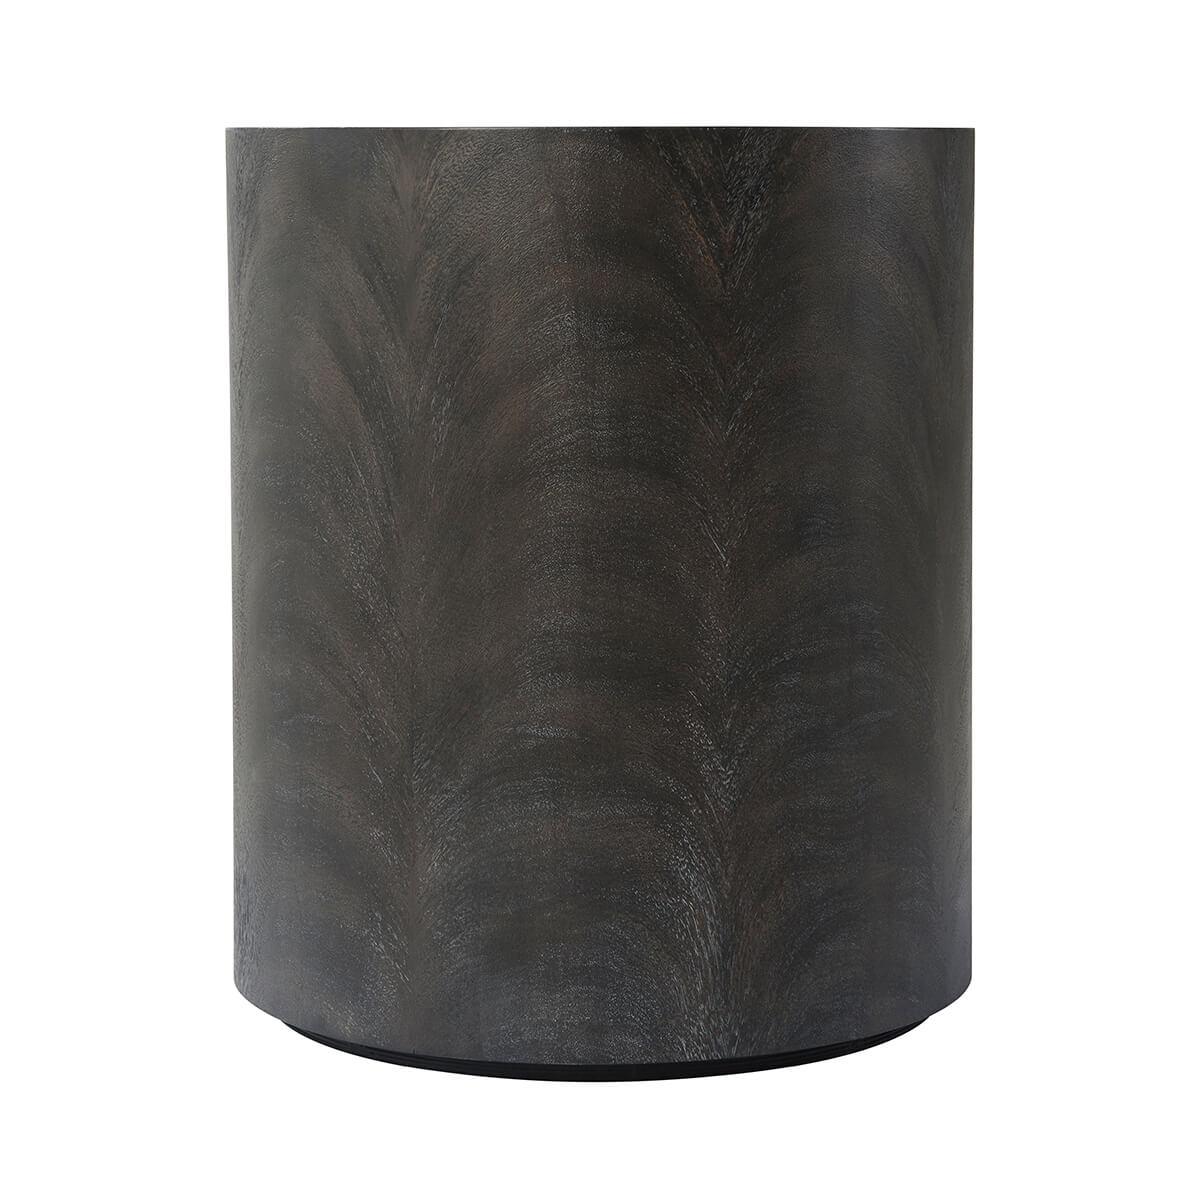 A modern Cylinder Accent Table, a swirl Cerejeira veneer cylindrical form end table. 
Dimensions: 20